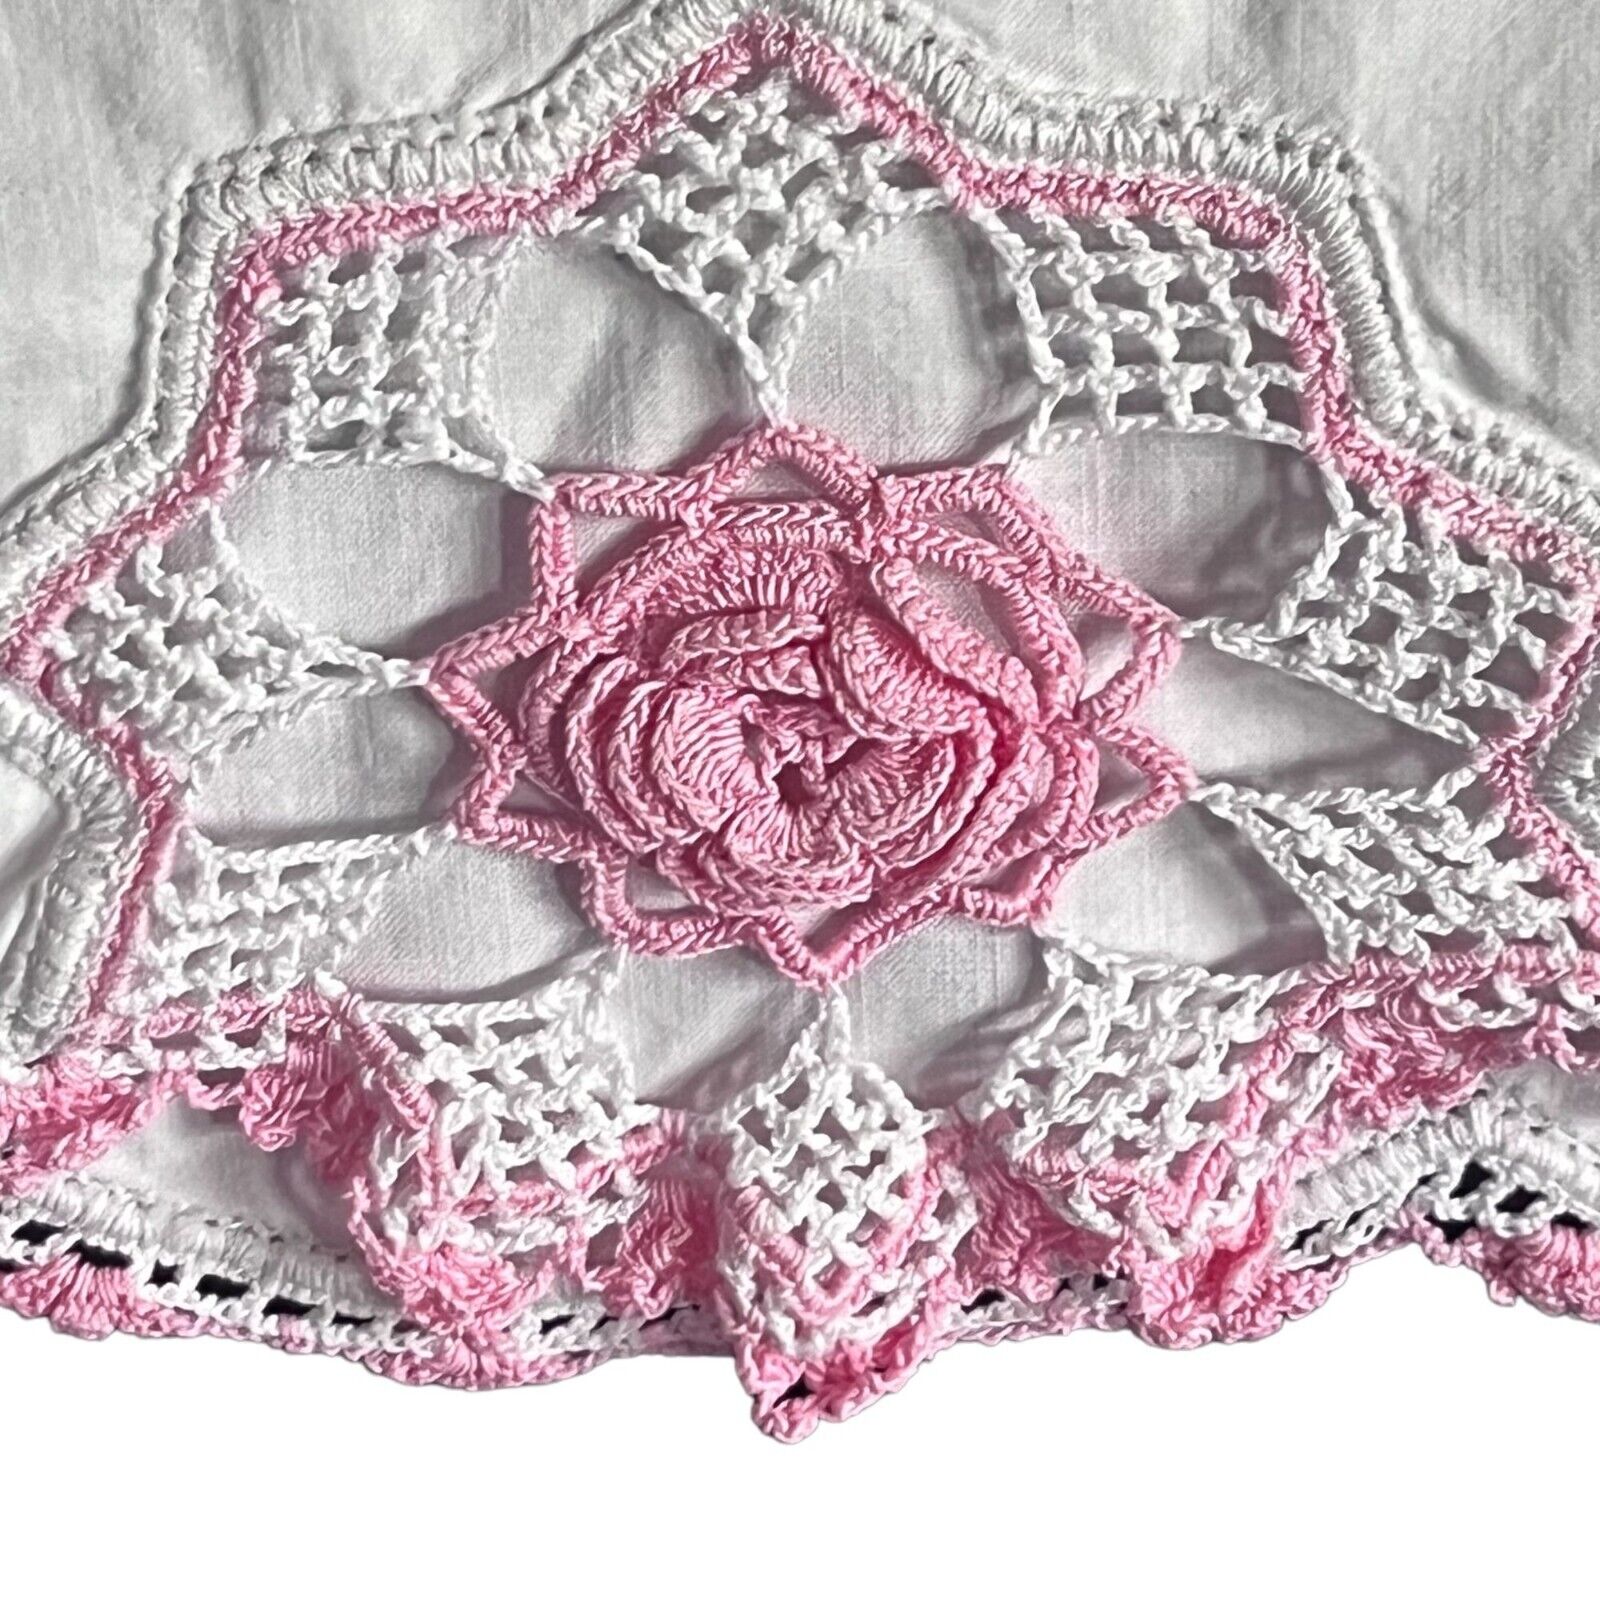 Vintage Crocheted King White Pillowcase Pink Floral Design at pillow insert